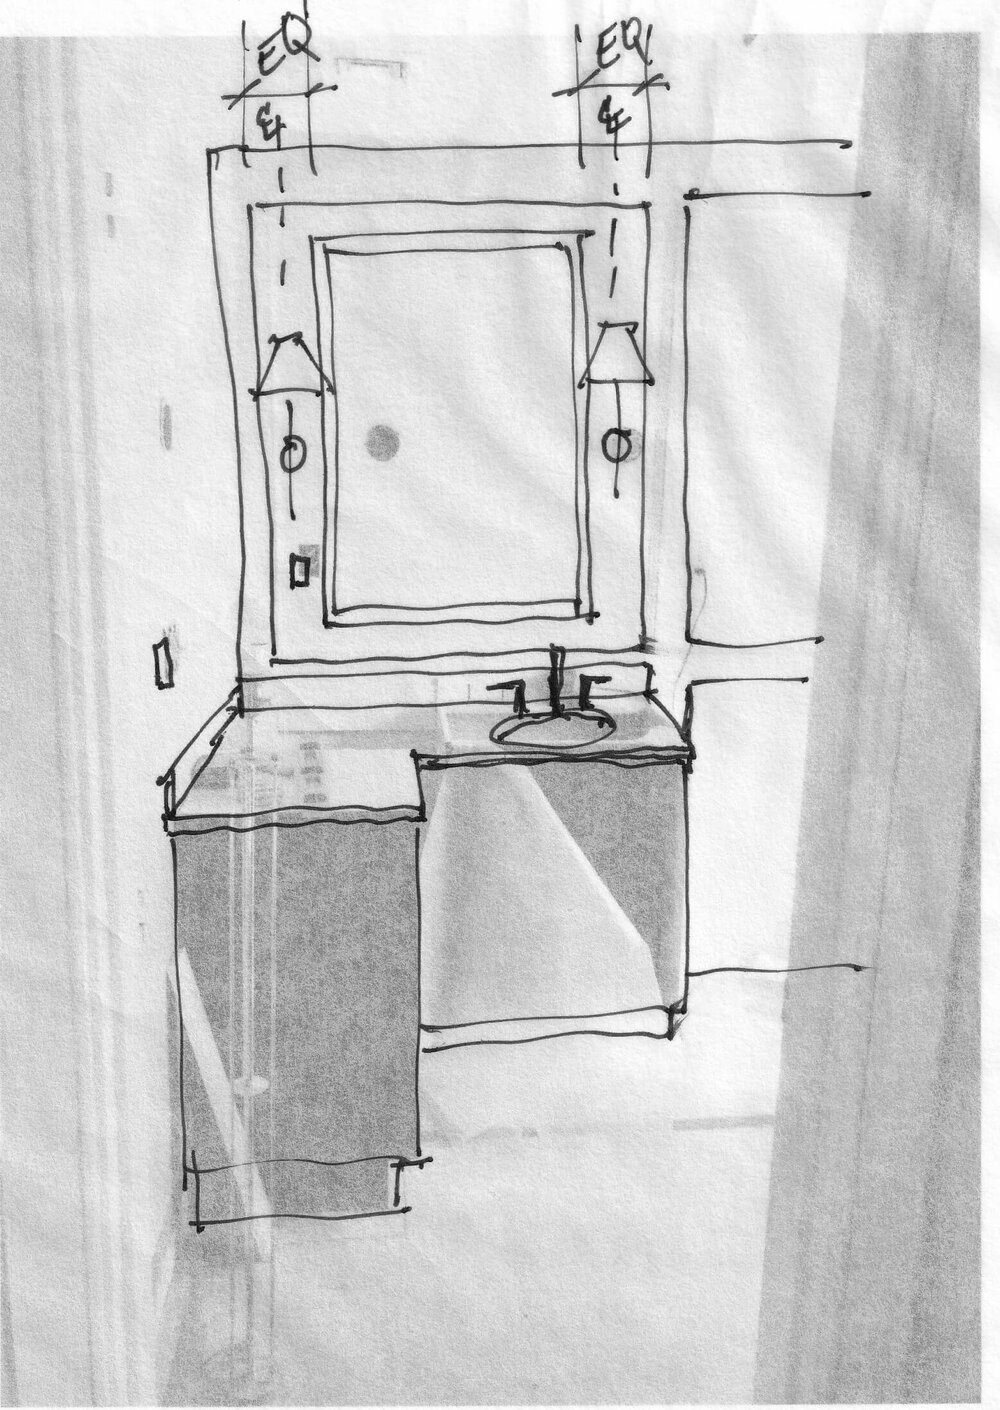 The Mirror When Your Sink Is Off Center, Bathroom Vanity With Off Center Sink